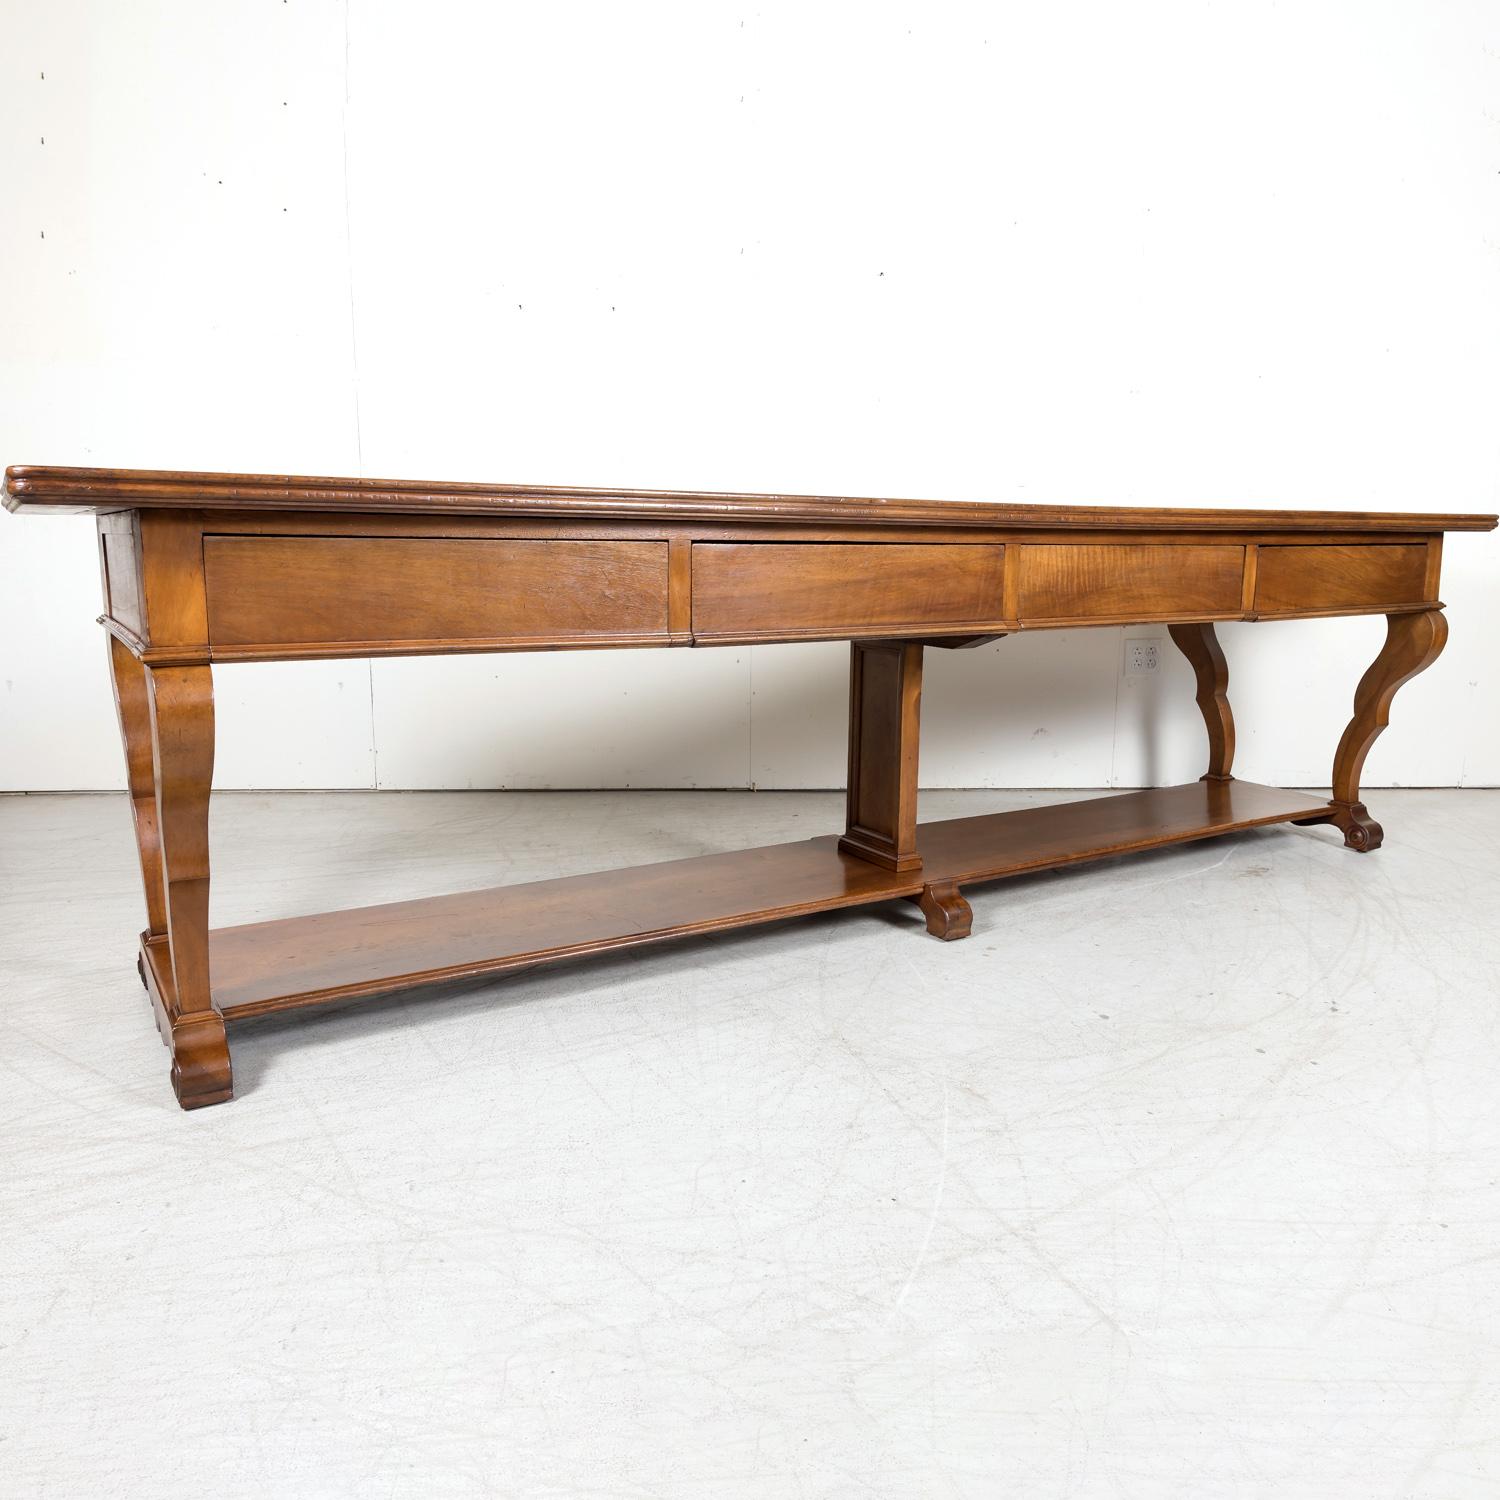 18th Century French Directoire Period Walnut Draper's Table with Marquetry Band In Good Condition For Sale In Birmingham, AL